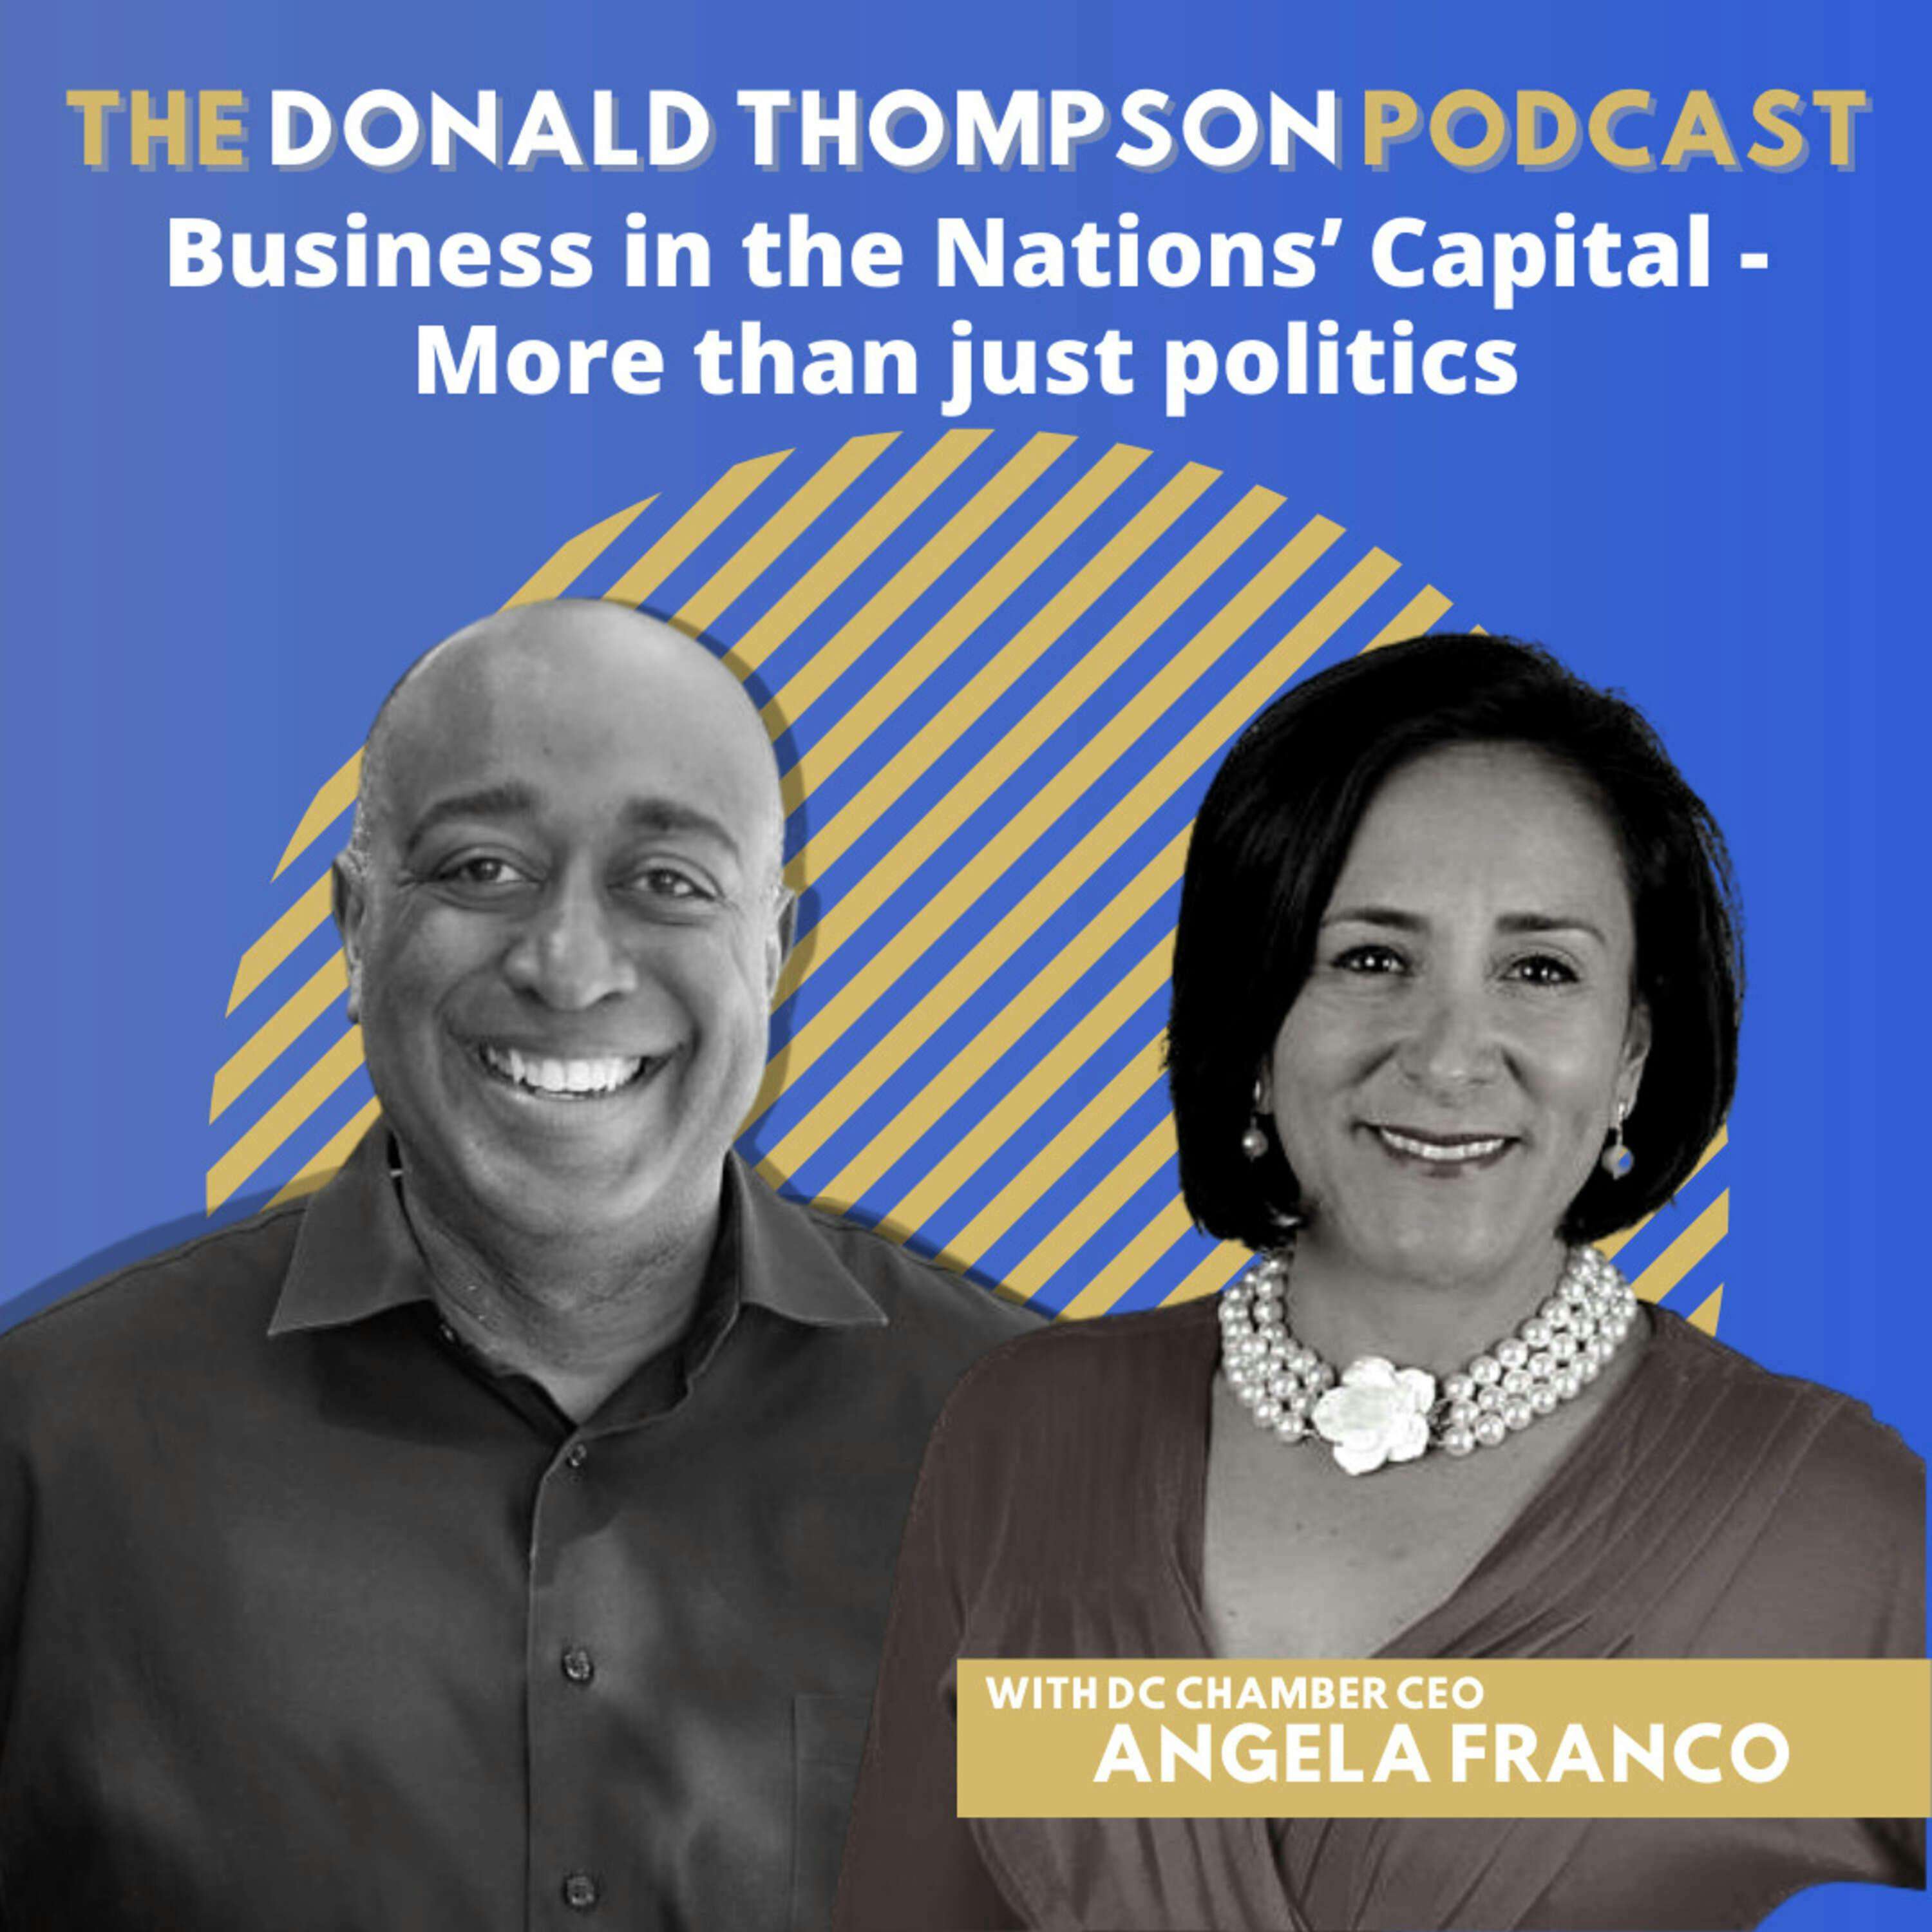 Business in the Nations’ Capital - More than just politics with Angela Franco from the DC Chamber